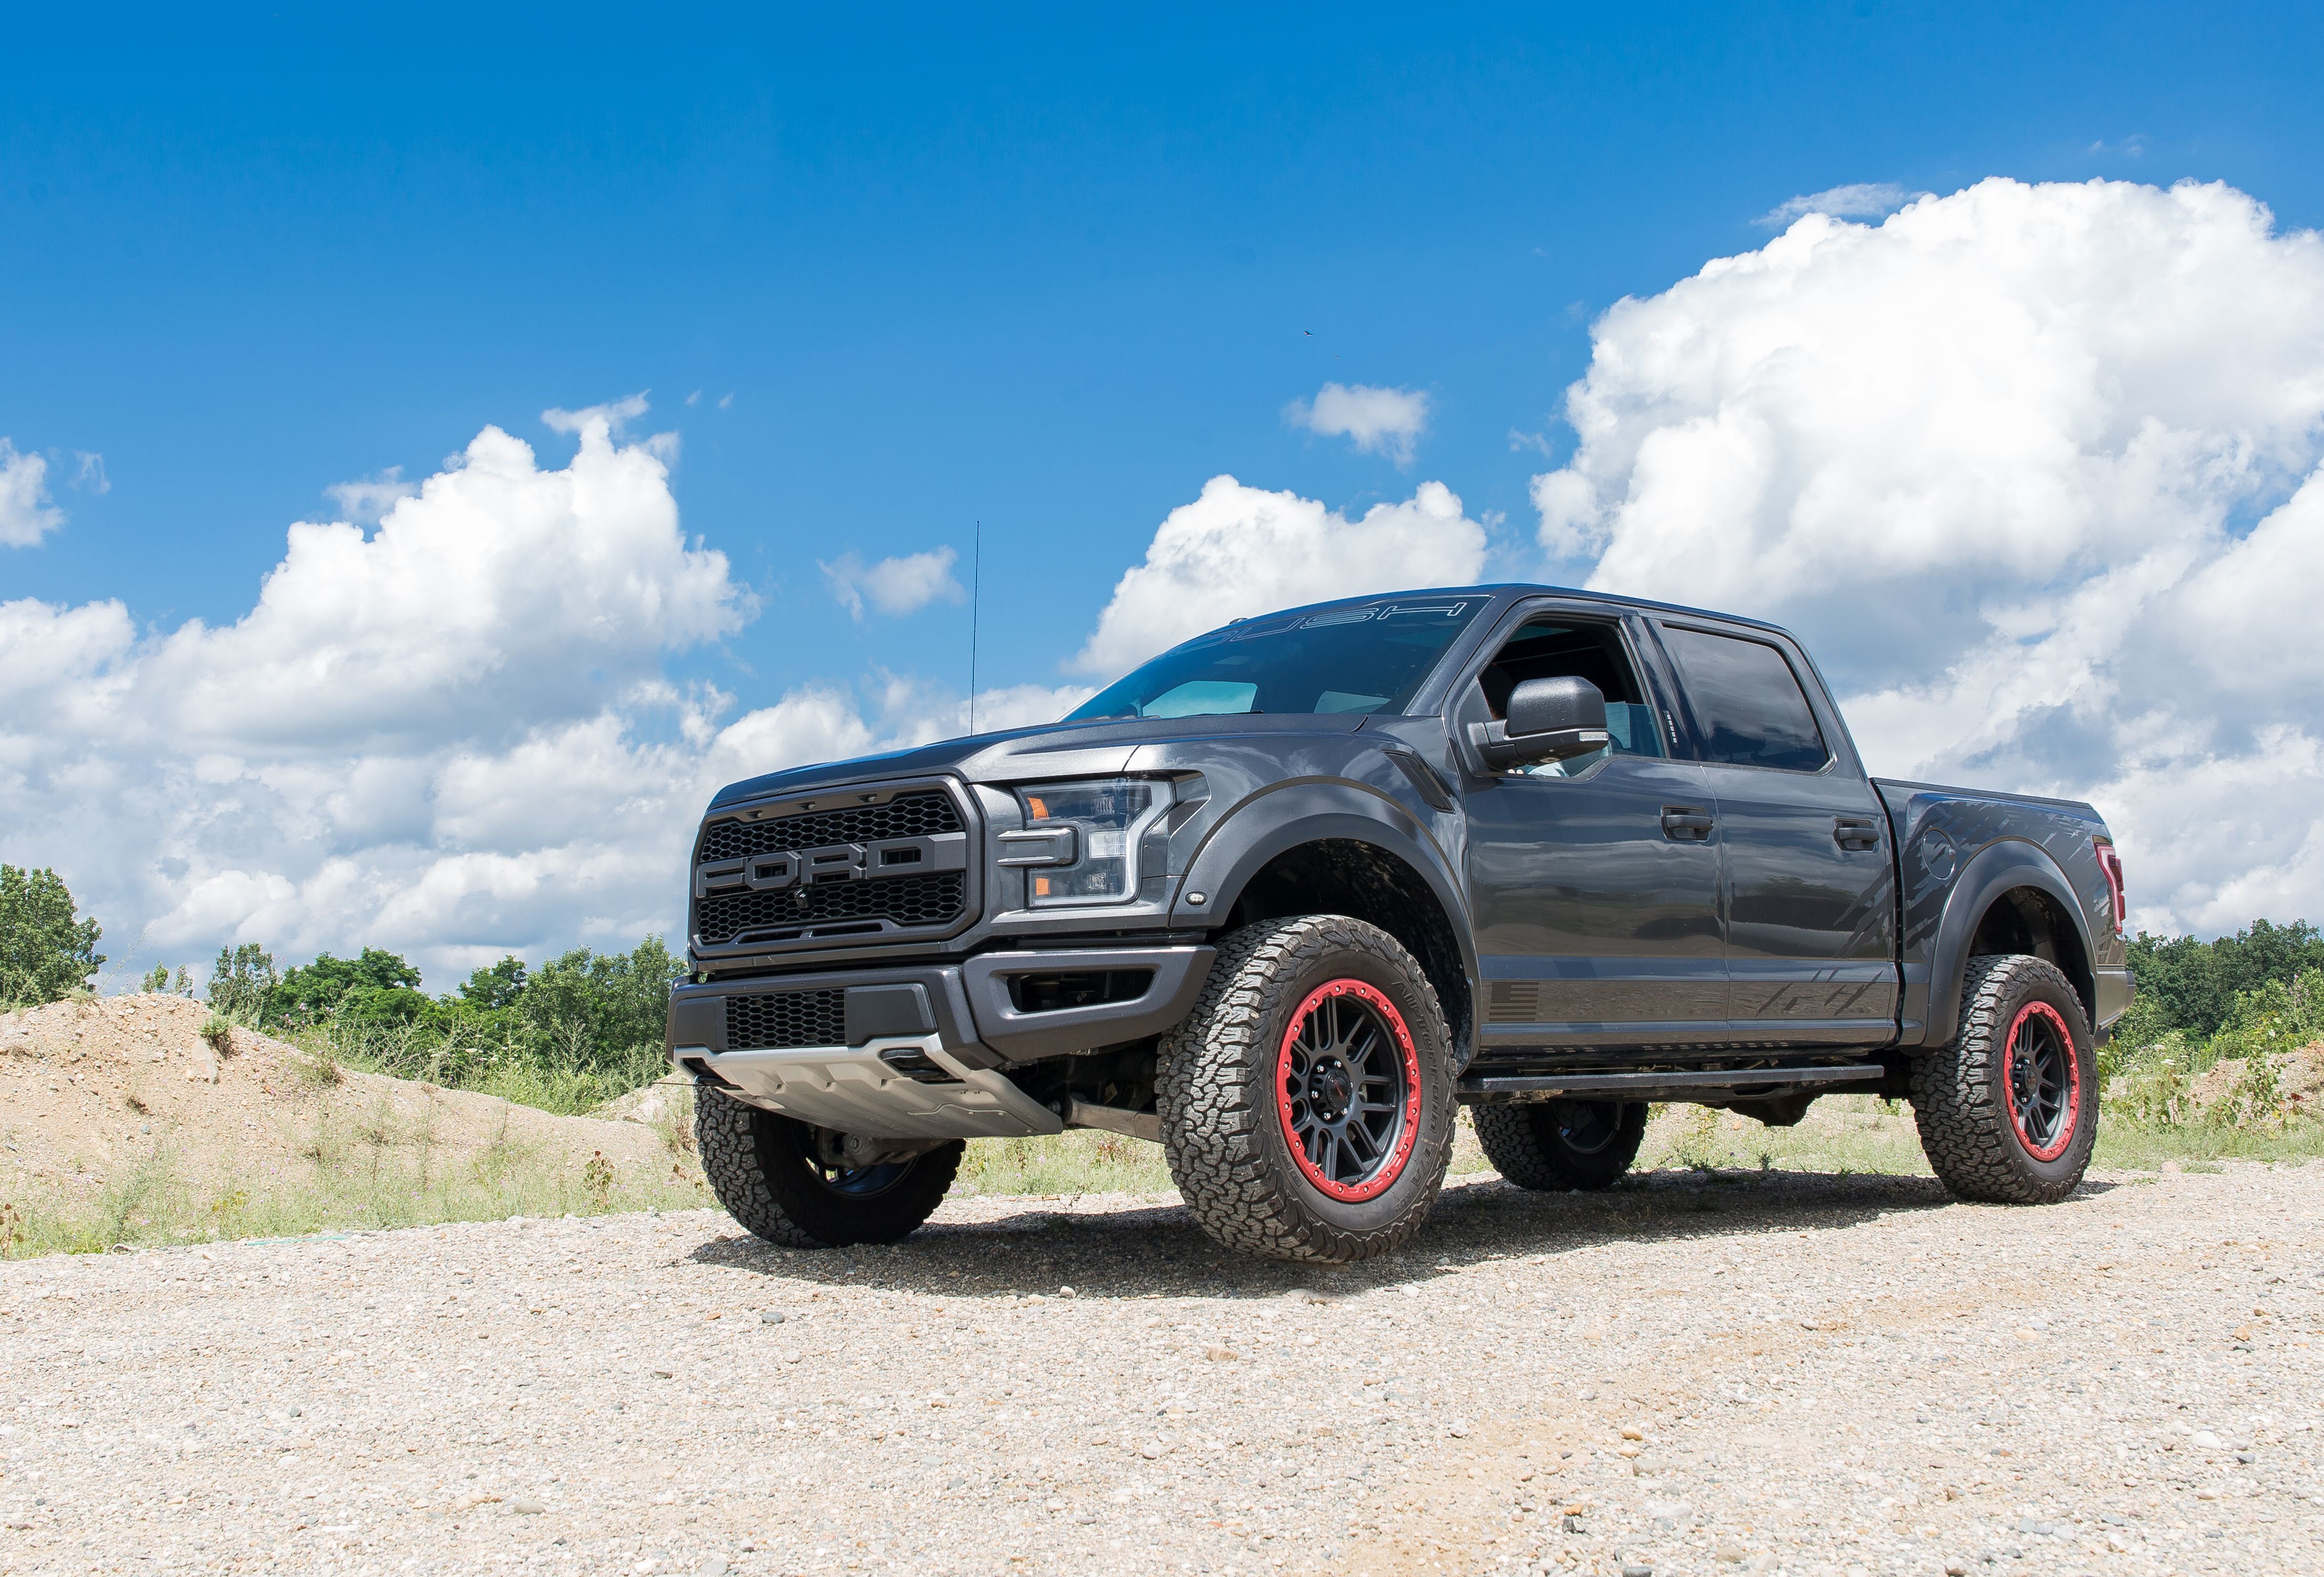 ROUSH Performance Welcomes the Raptor to its Vehicle Lineup